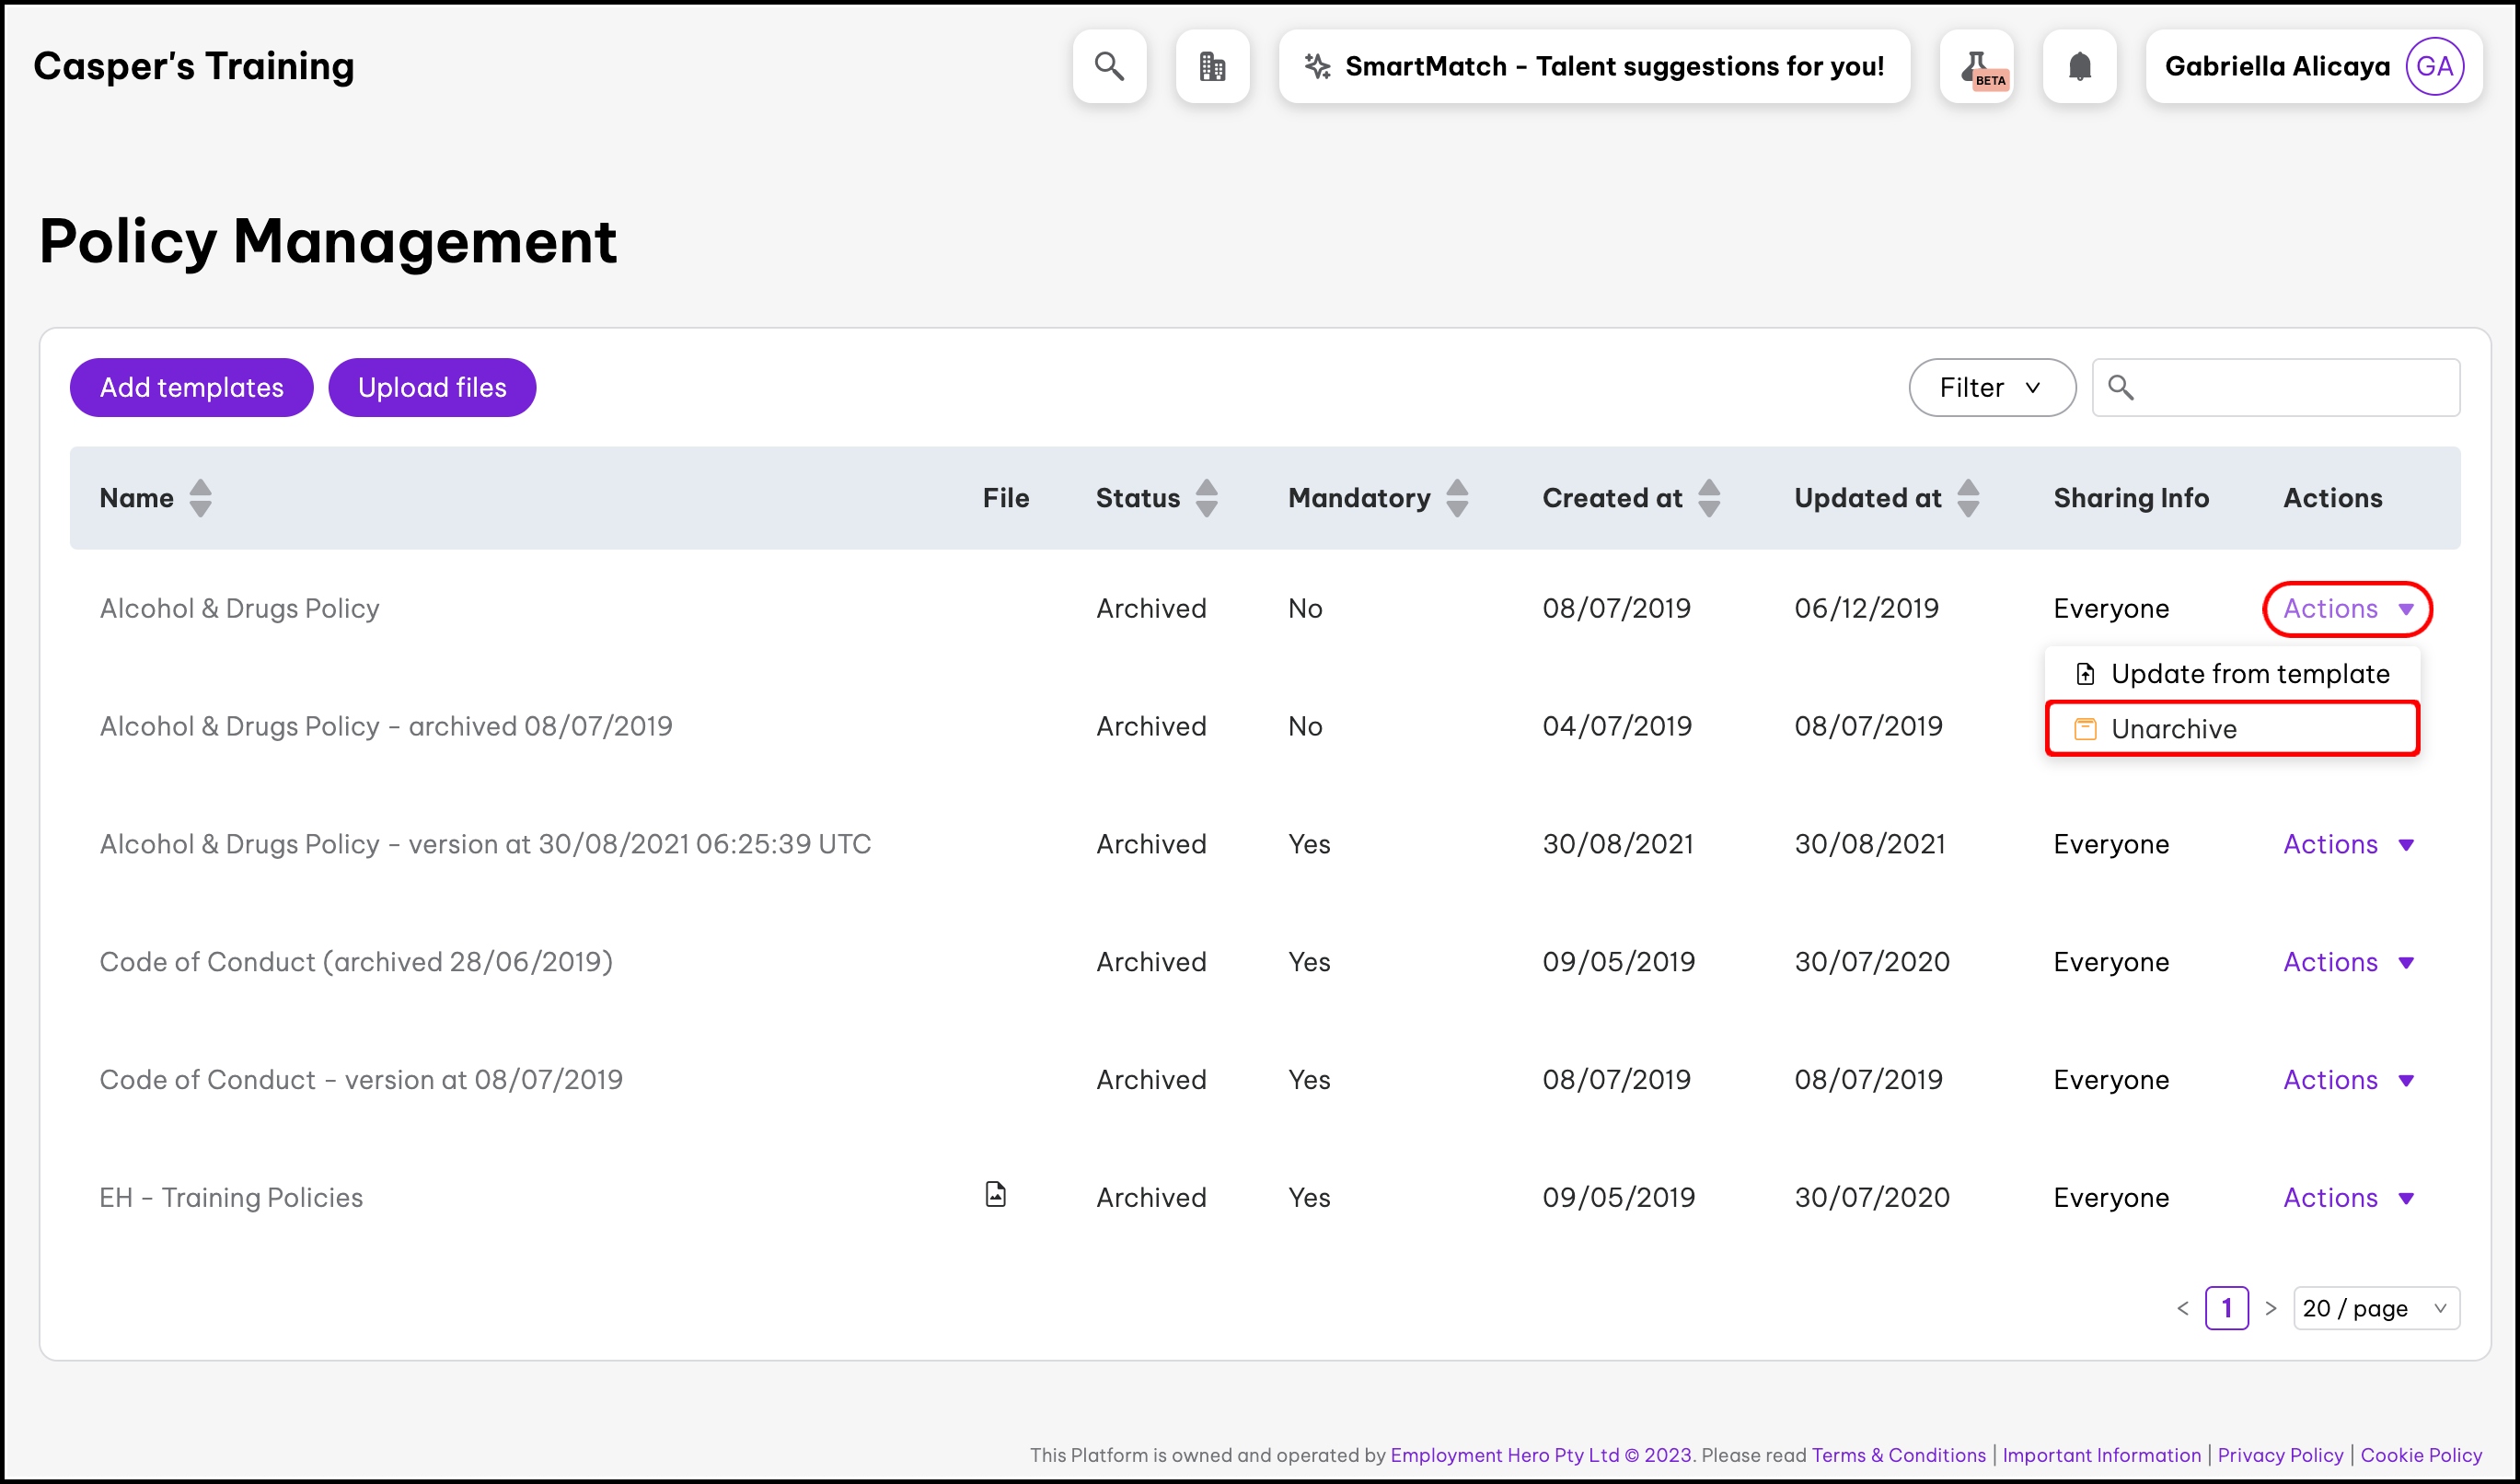 screenshot of the policy management page, highlighting the actions and unarchive buttons for a policy